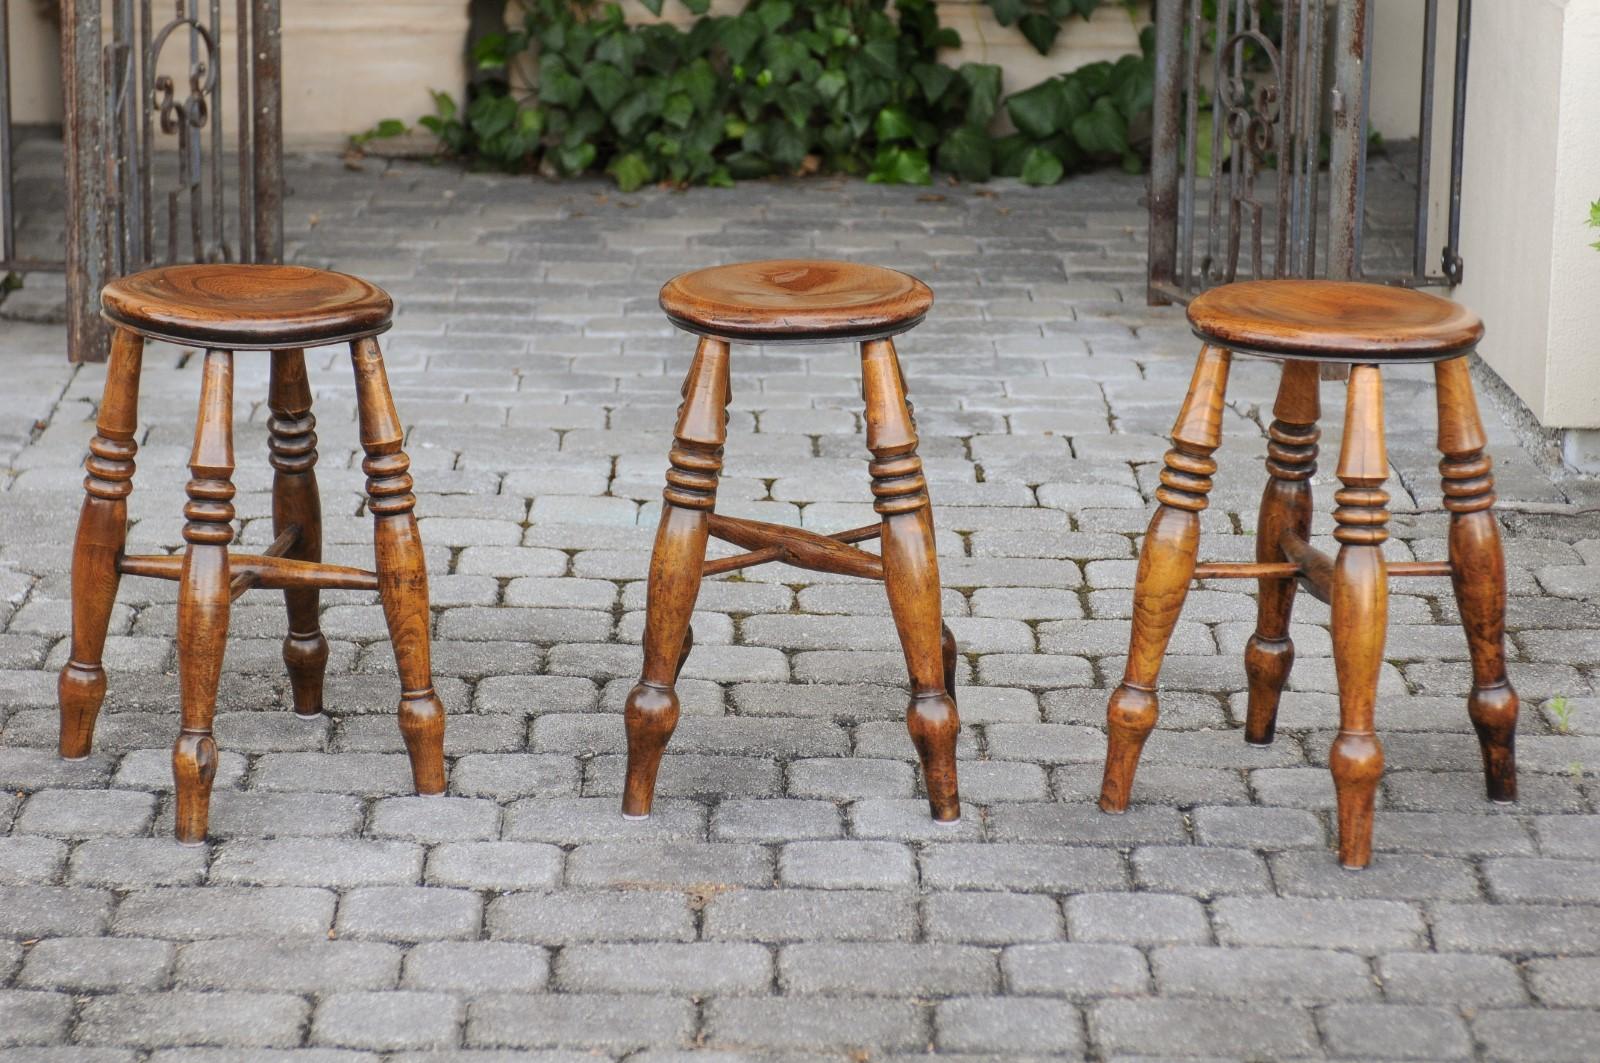 Three English elmwood stools from the late 19th century, with turned legs and cross stretchers. They are priced and sold individually. Born in England during the later years of the 19th century, each of these three elm stools features a circular top